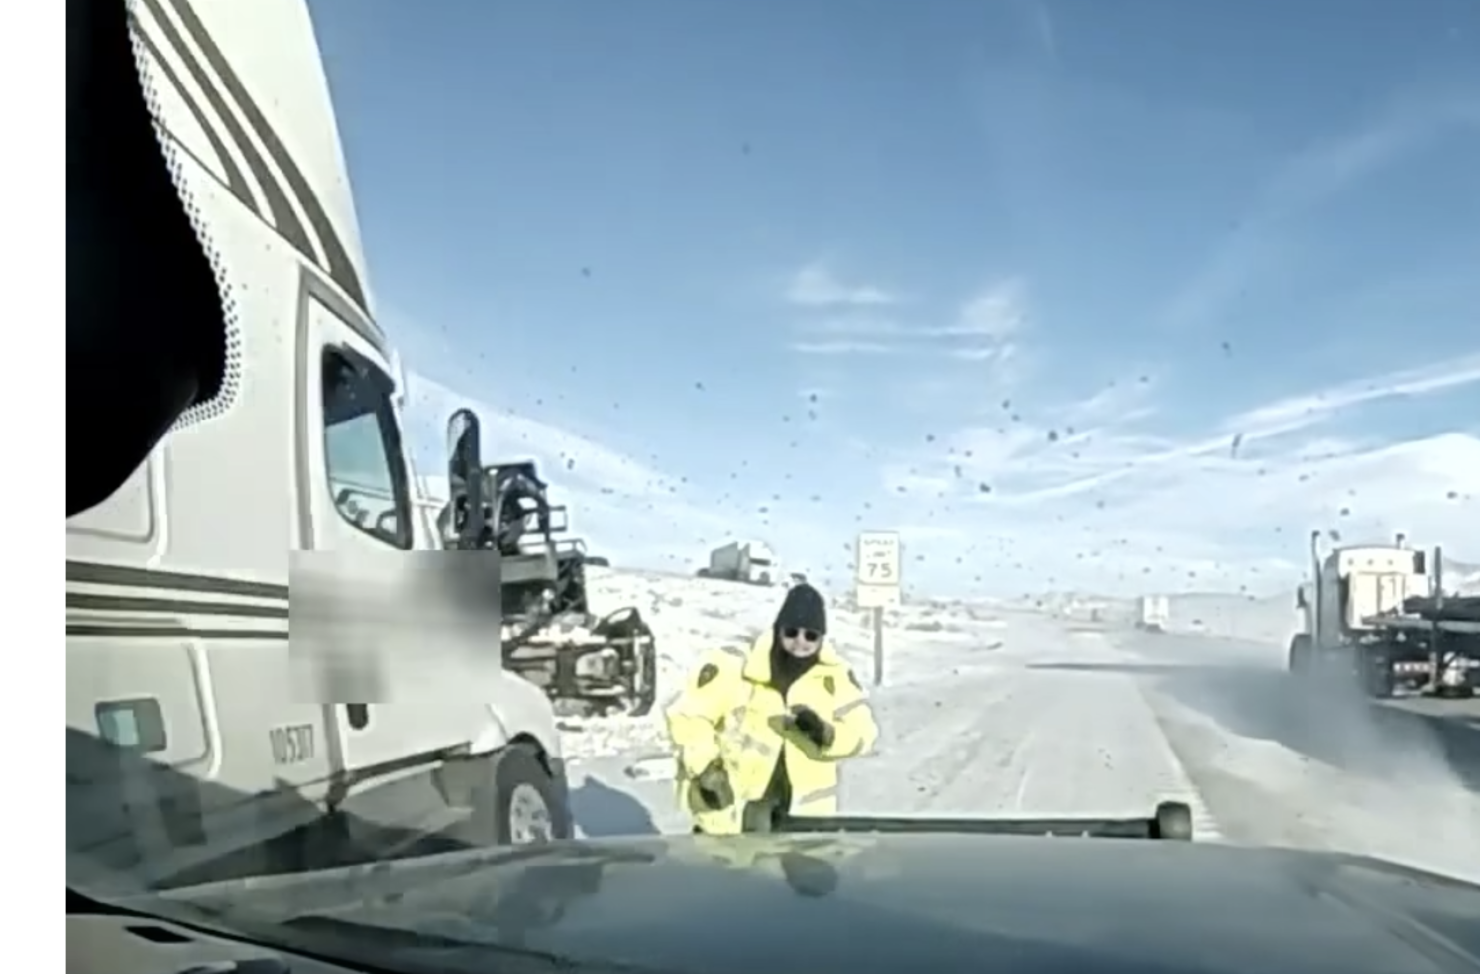 WATCH: Wyoming State Trooper Narrowly Escapes Semi Collision On Snowy ...